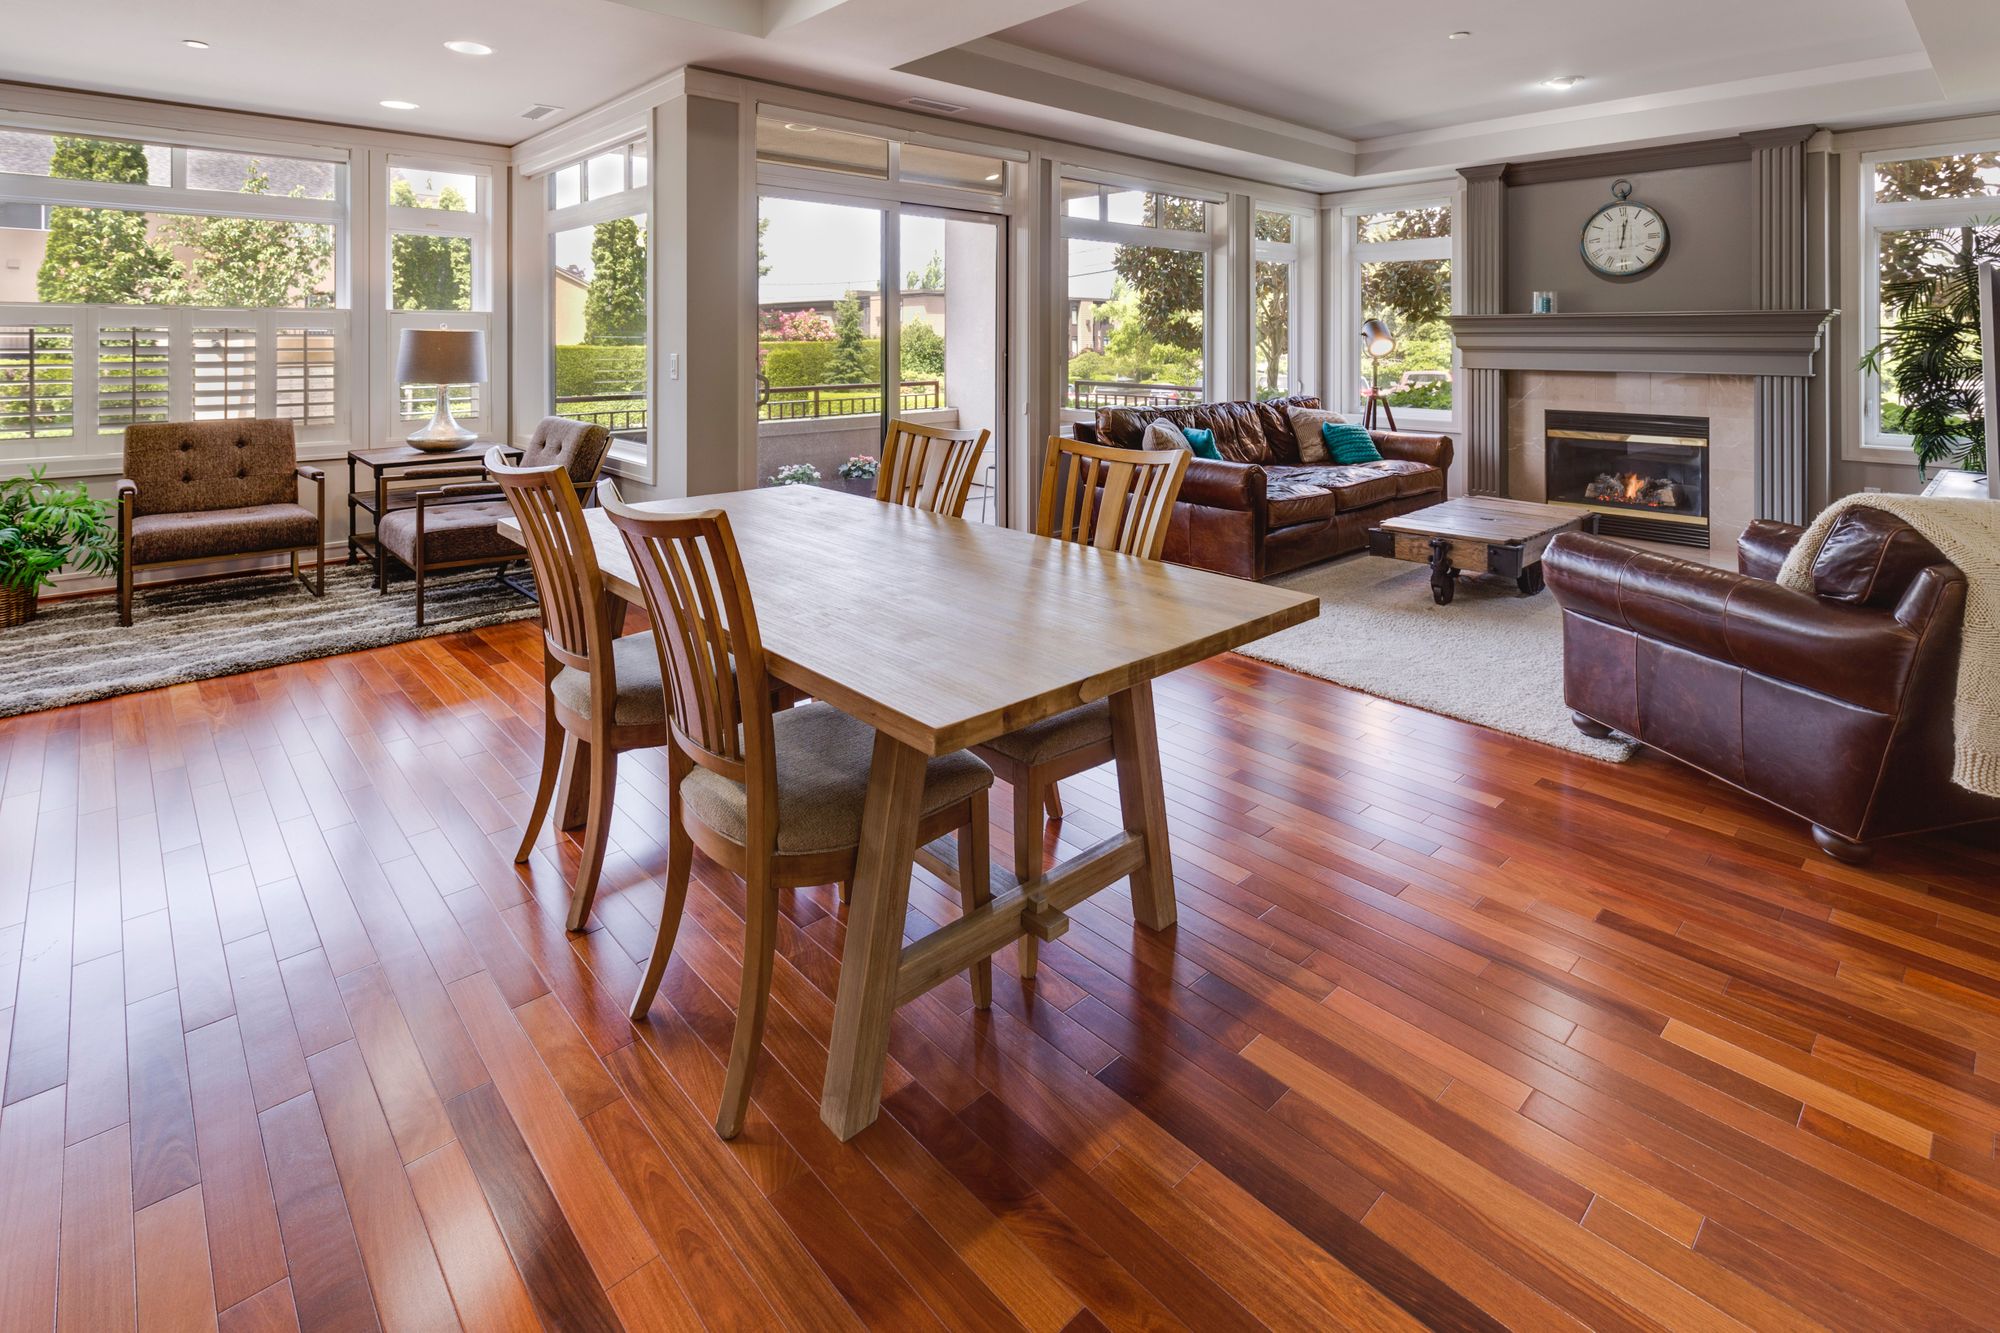 Do Hardwood Floors Increase Home Value, Average Cost To Have Hardwood Floors Installed